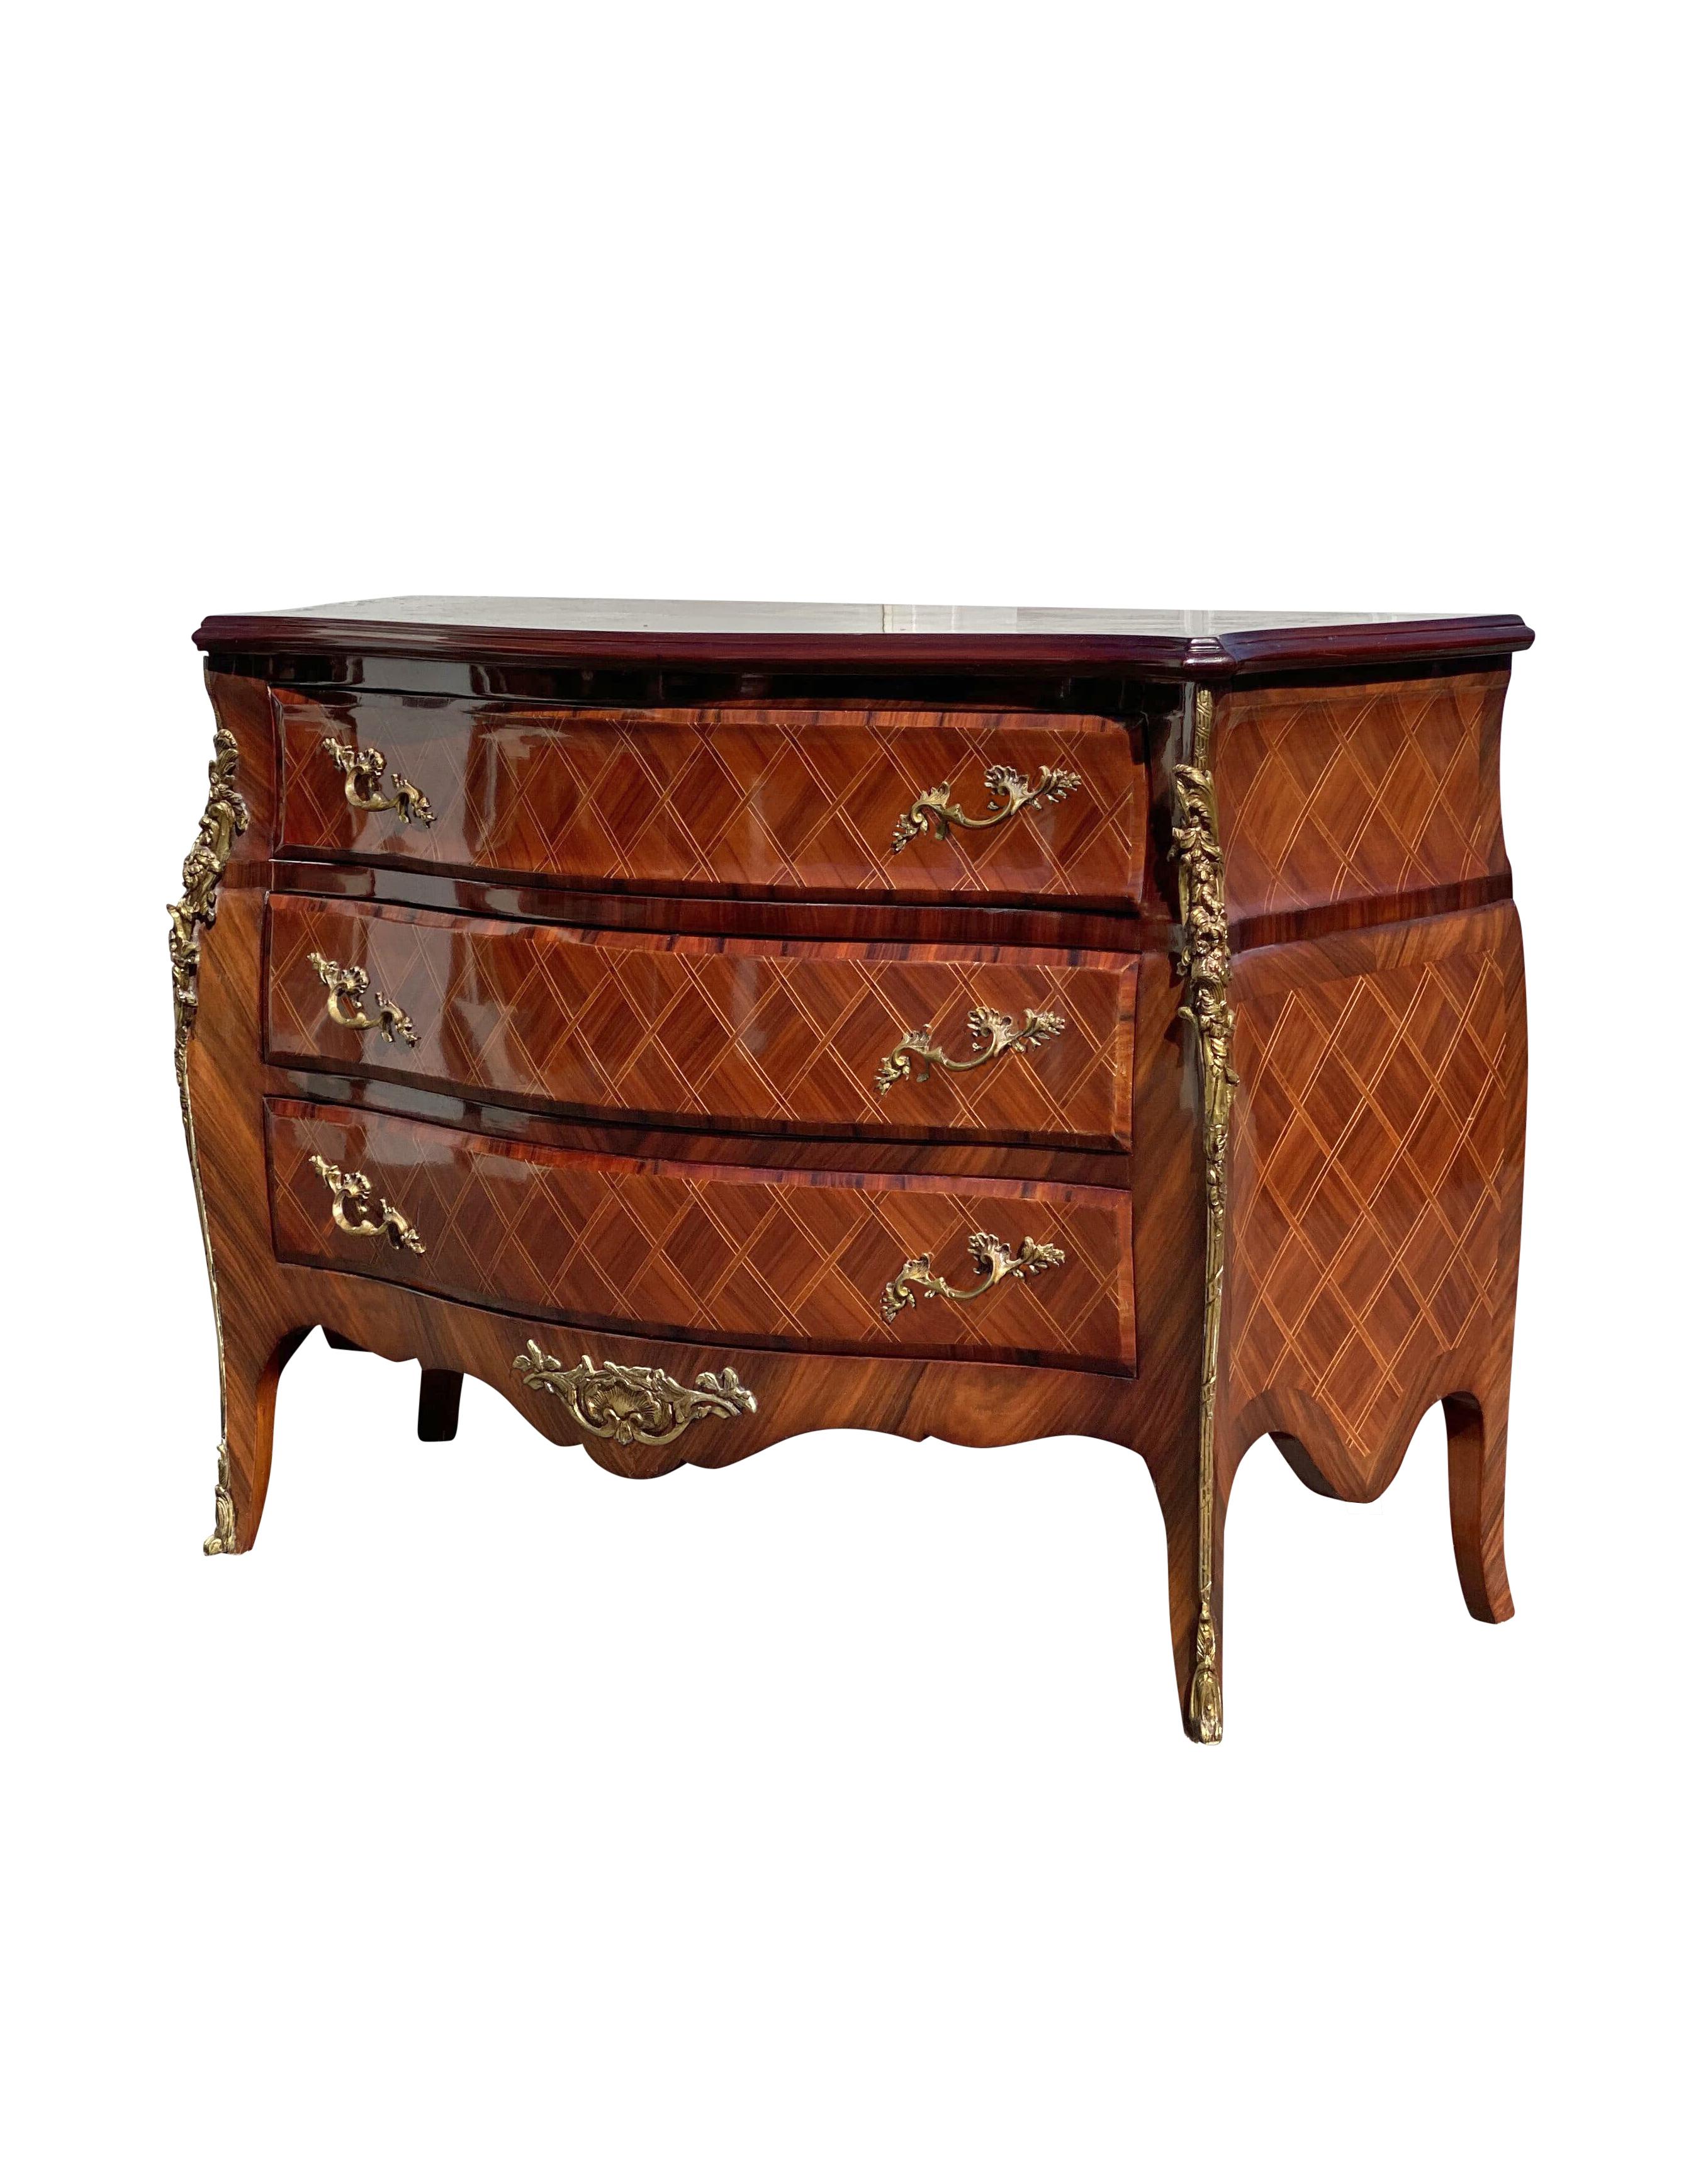 Unknown French Louis Antique Inlay and Gilt Bombe Commode Chest For Sale